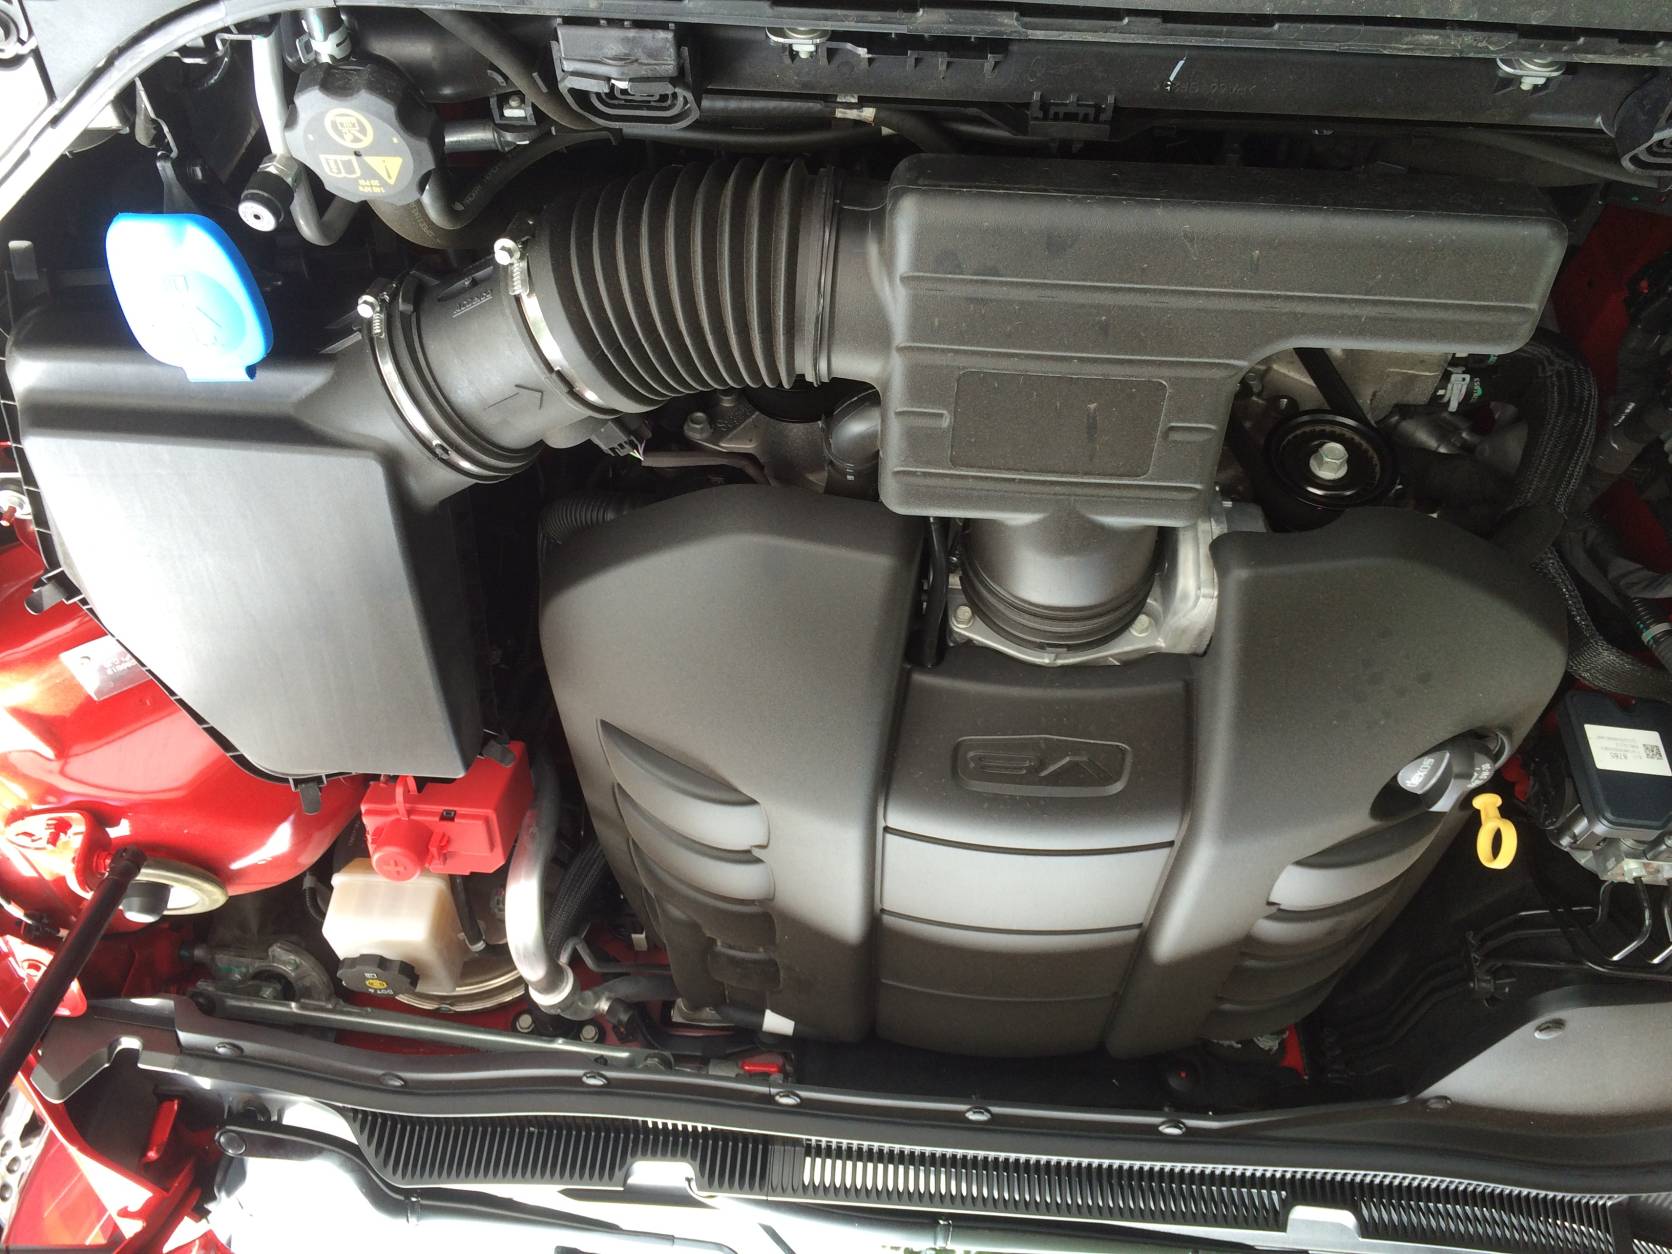 2022 chevy ss engine